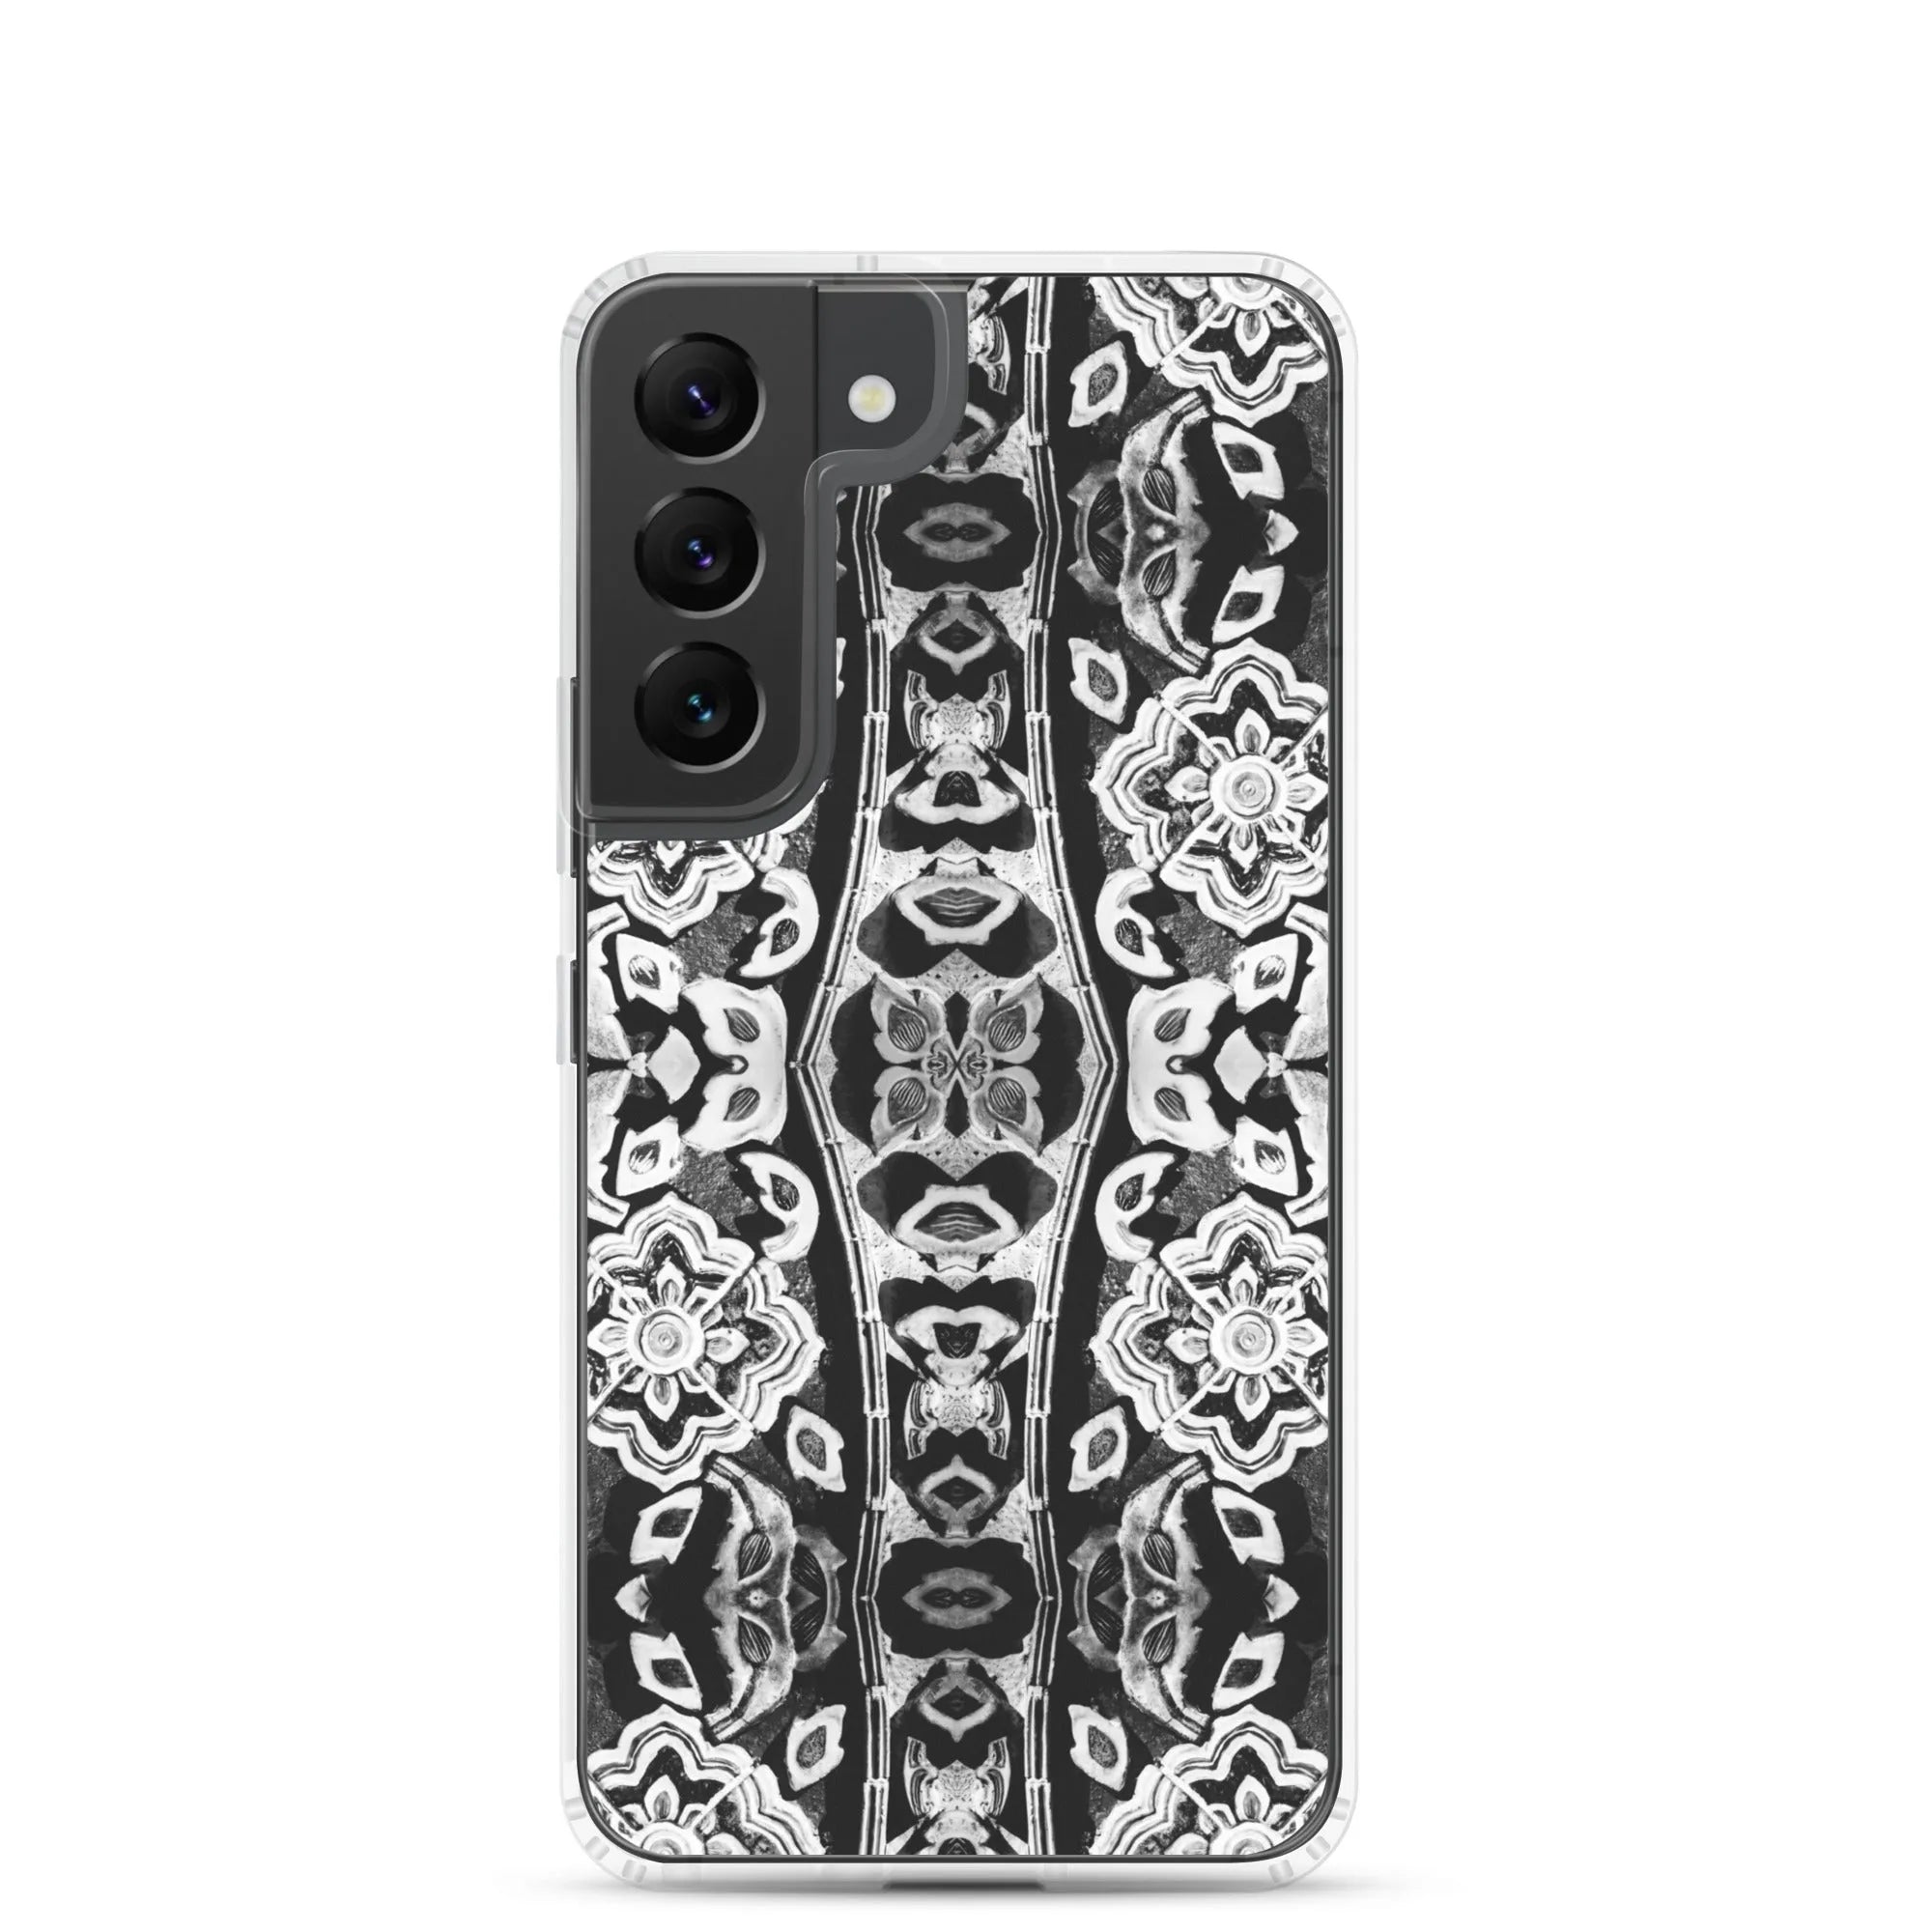 Masala Thai Samsung Galaxy Case - Black And White - Samsung Galaxy S22 - Mobile Phone Cases - Aesthetic Art